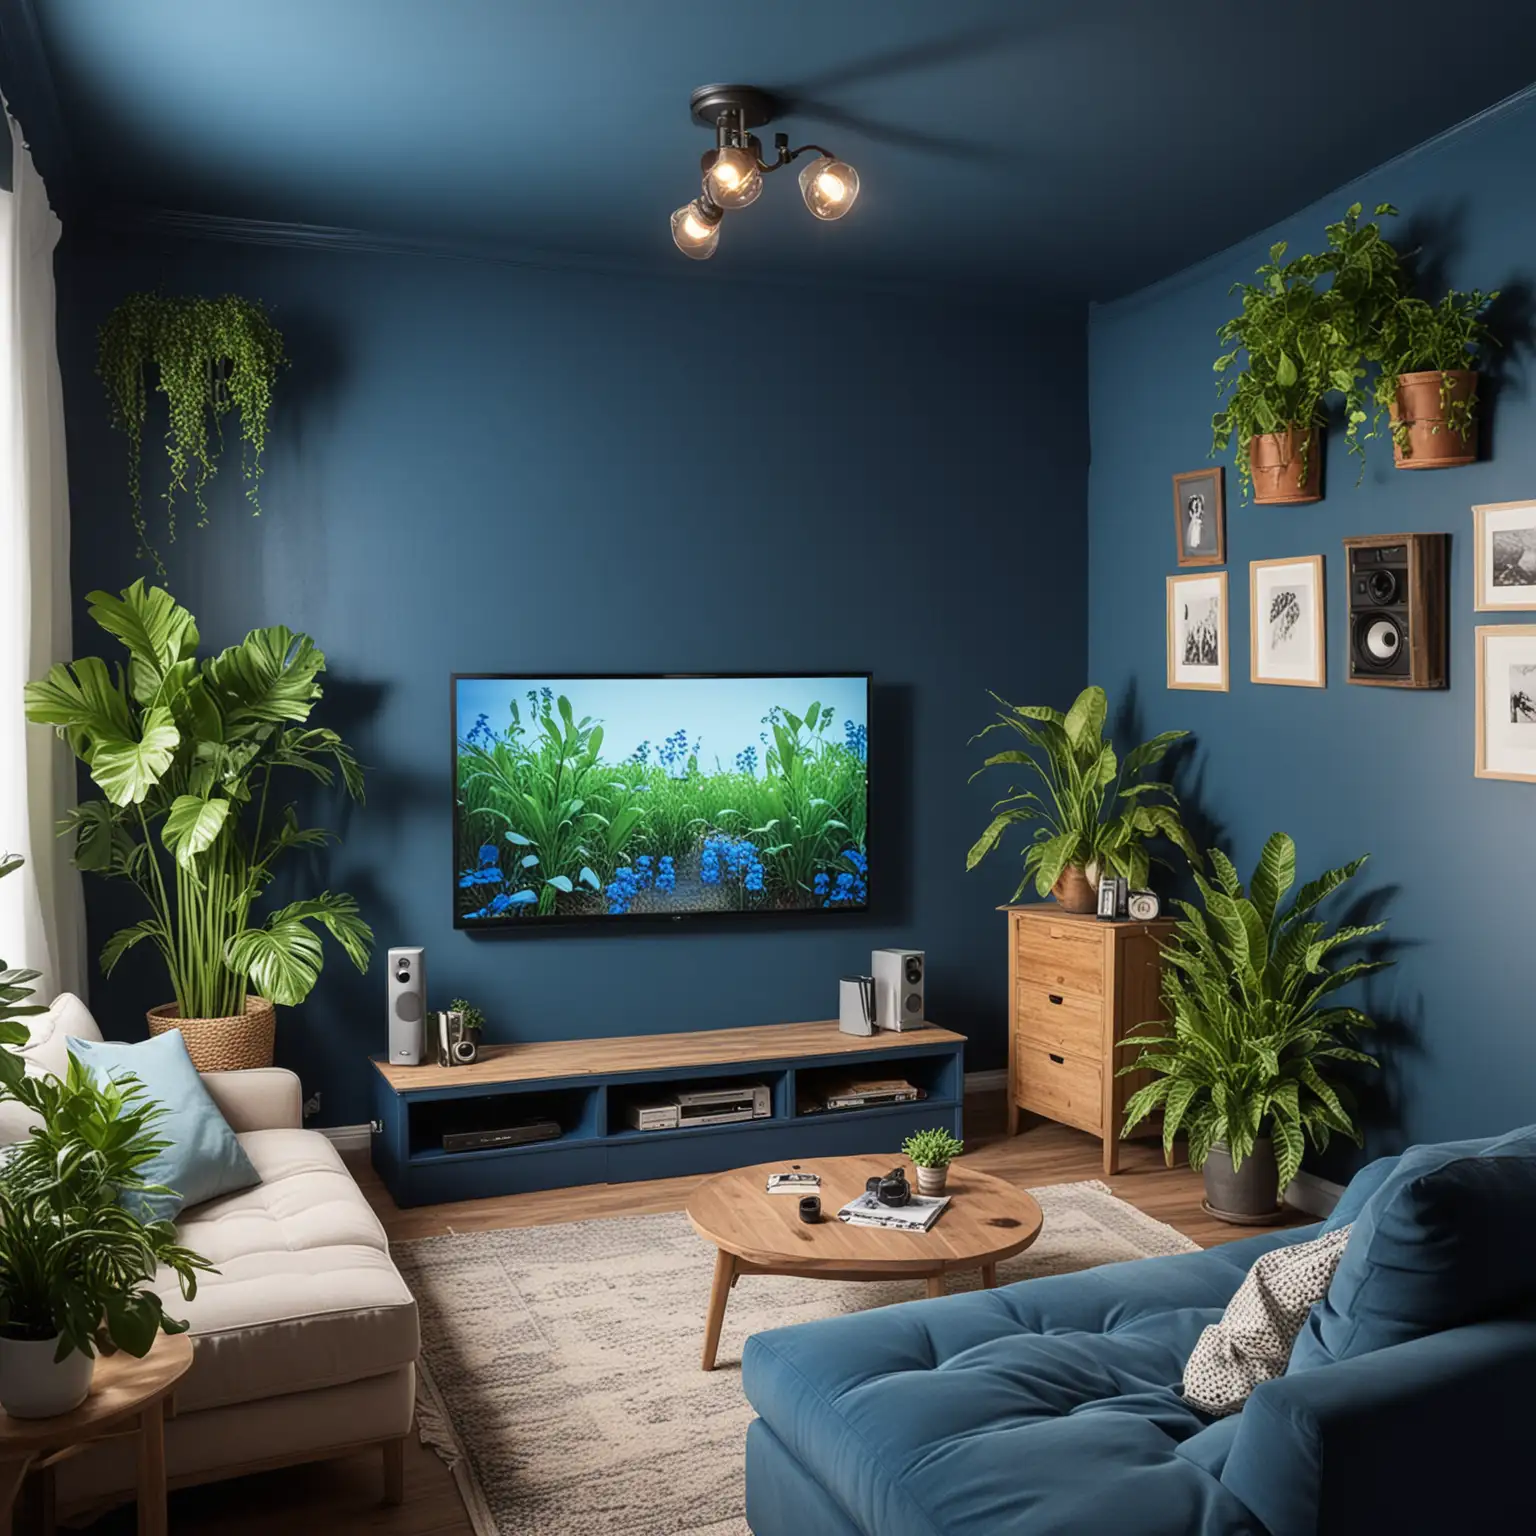 Compact NeoRustic Home Theater with Vibrant Blue Walls and BuiltIn Projector Screen